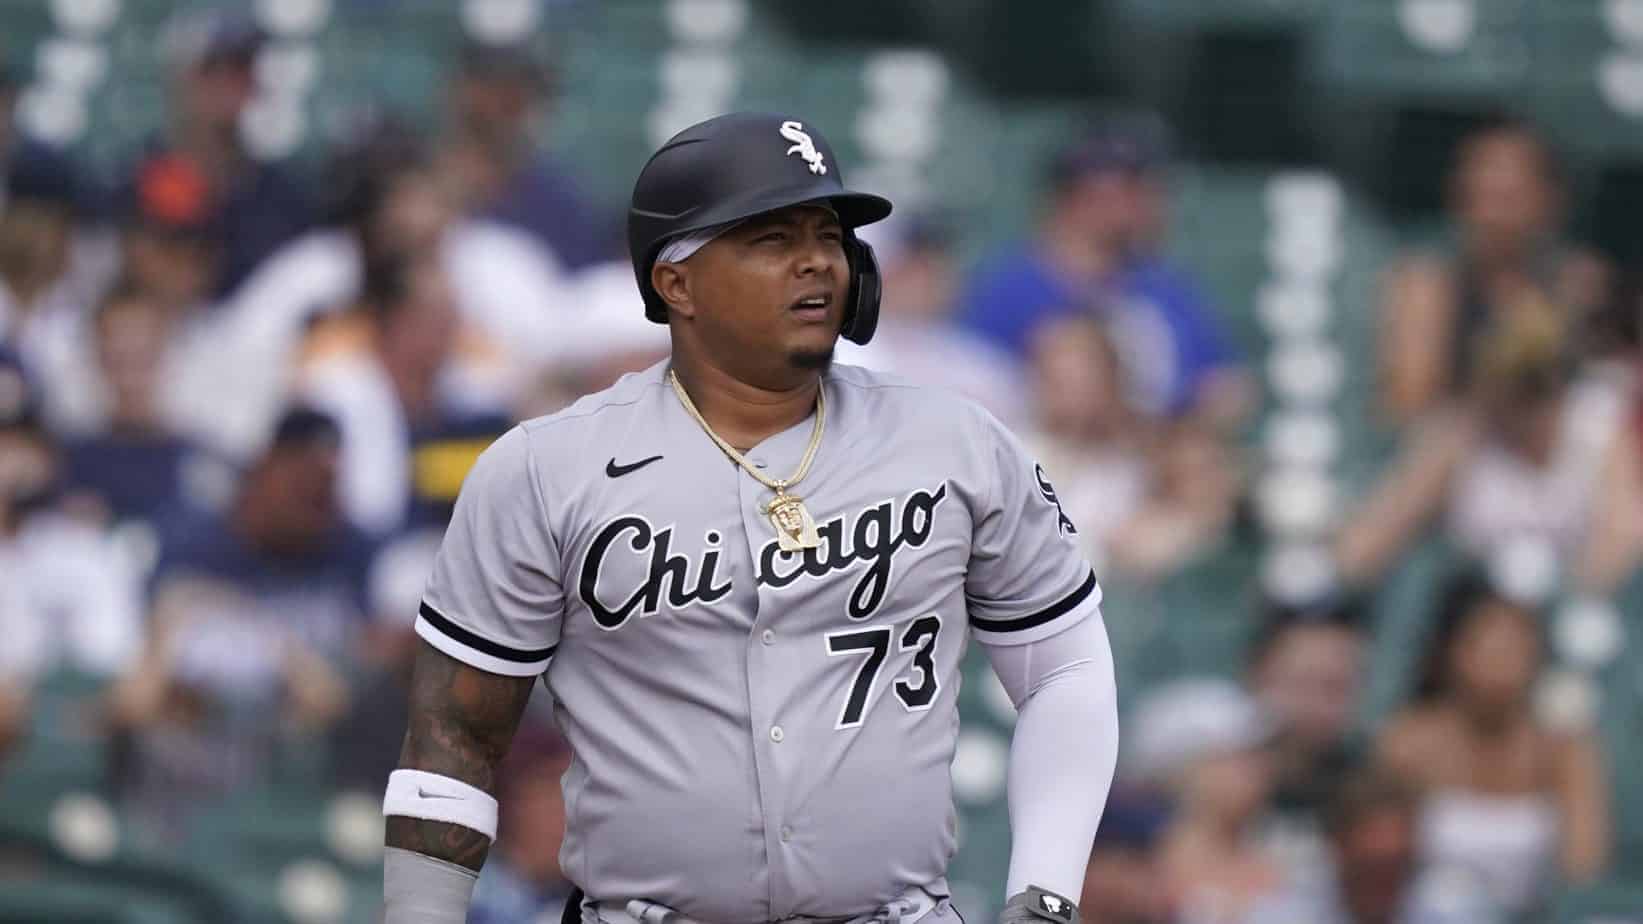 Chicago White Sox designated hitter Yermin Mercedes has surprisingly announced his retirement after being sent down to the minor leagues